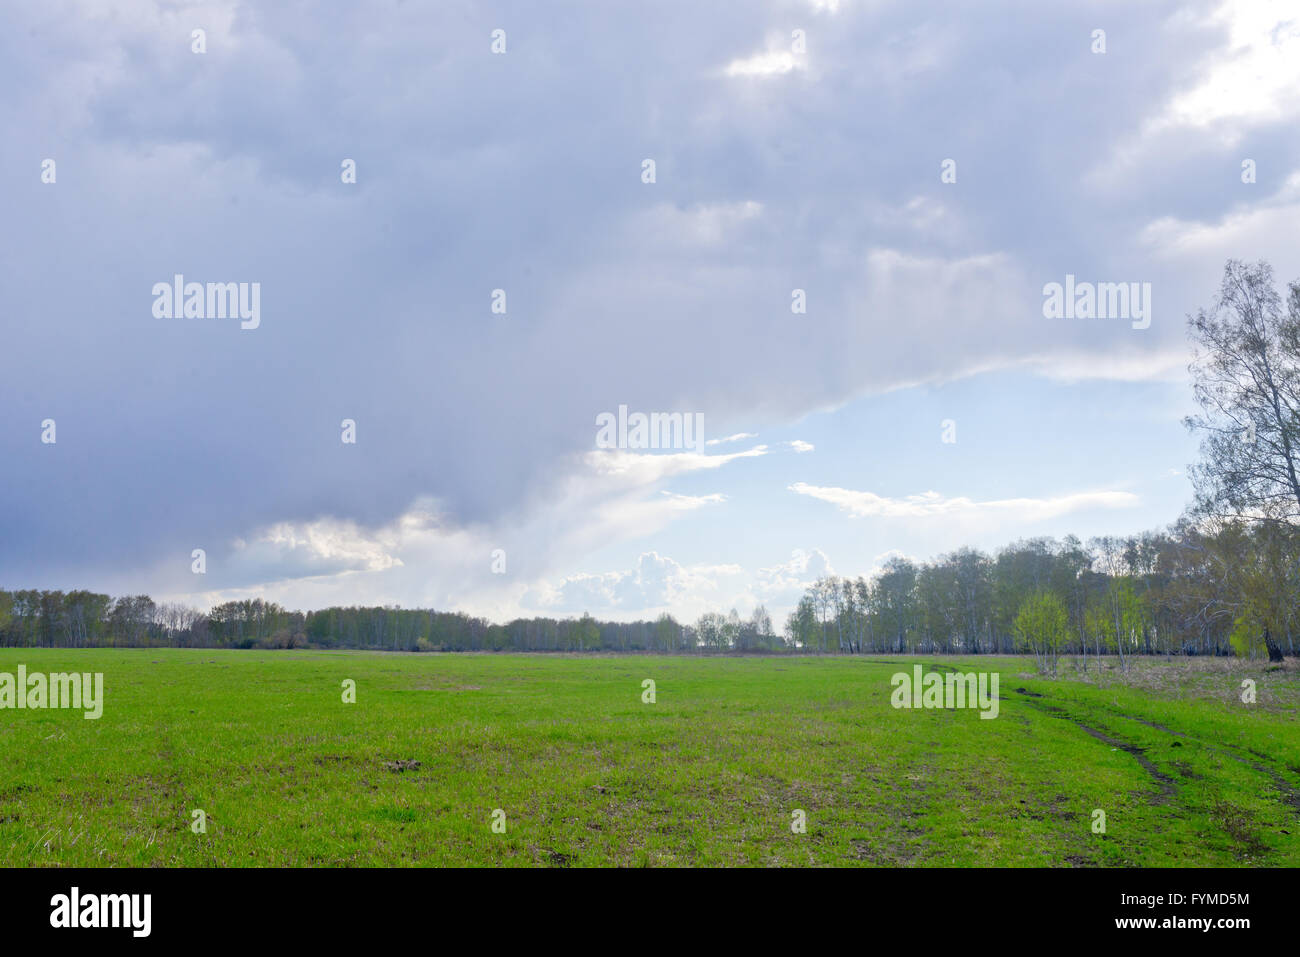 stormy clouds over a green field Stock Photo